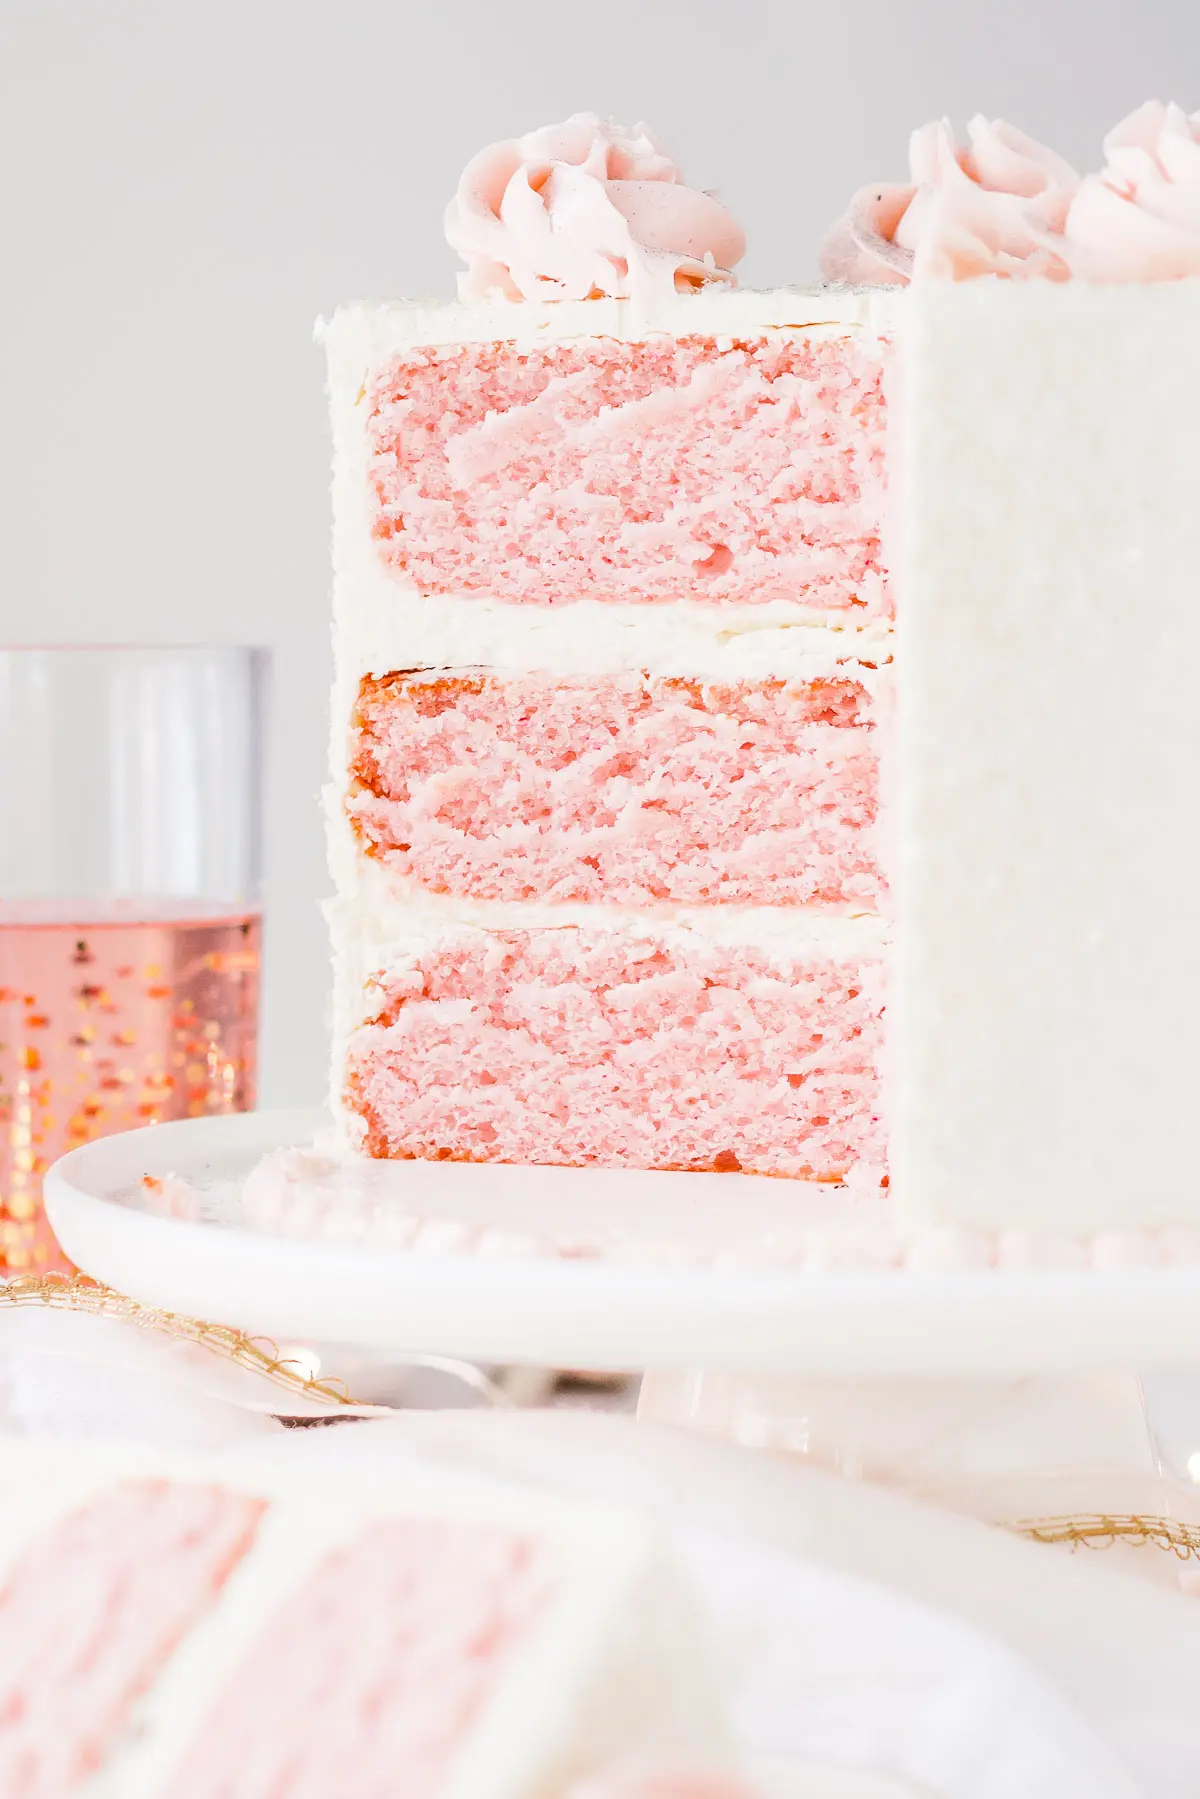 Cross section of pink champagne cake with vanilla buttercream.